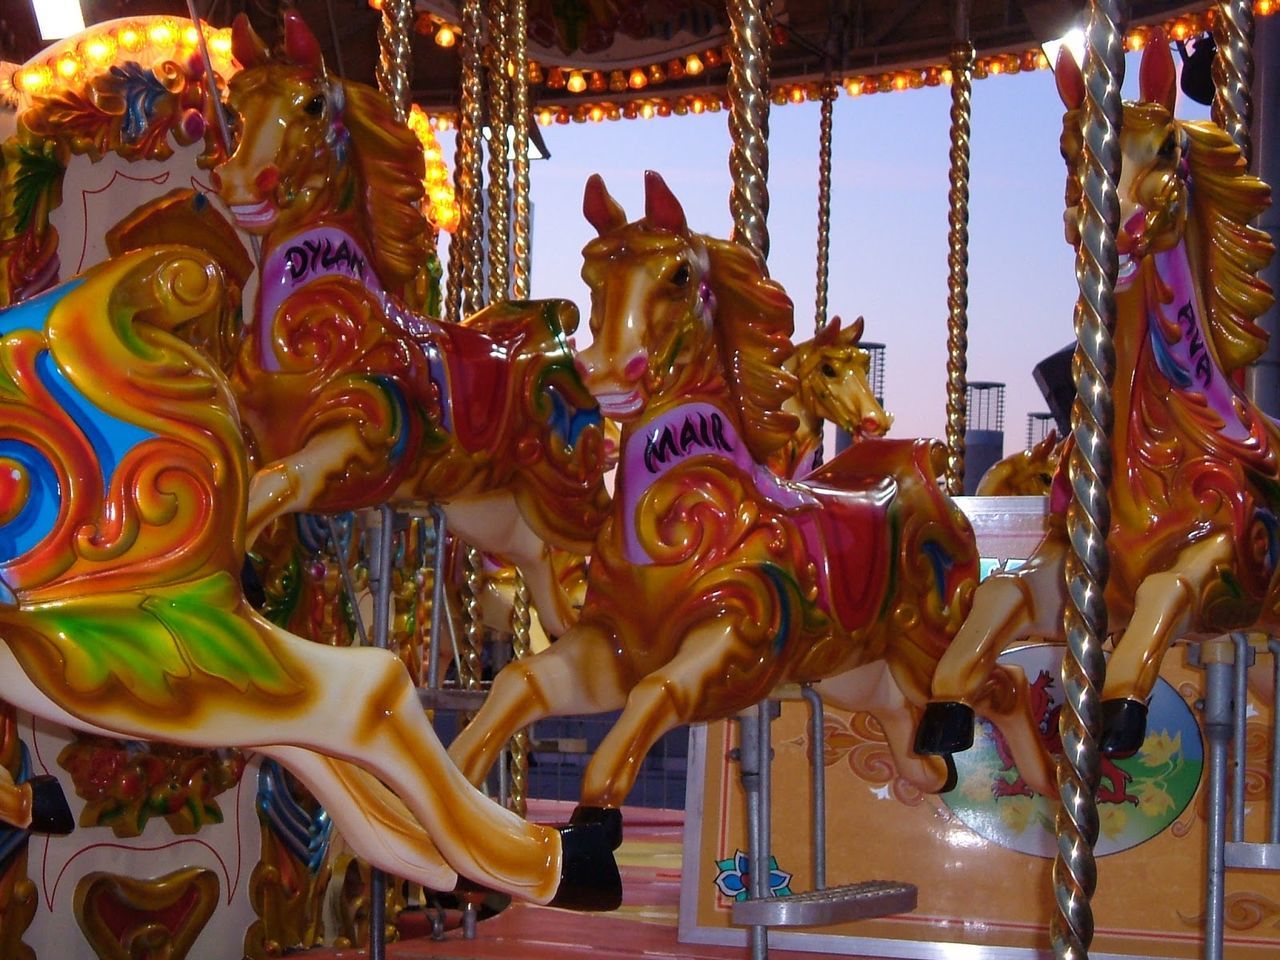 VIEW OF CAROUSEL IN AMUSEMENT PARK